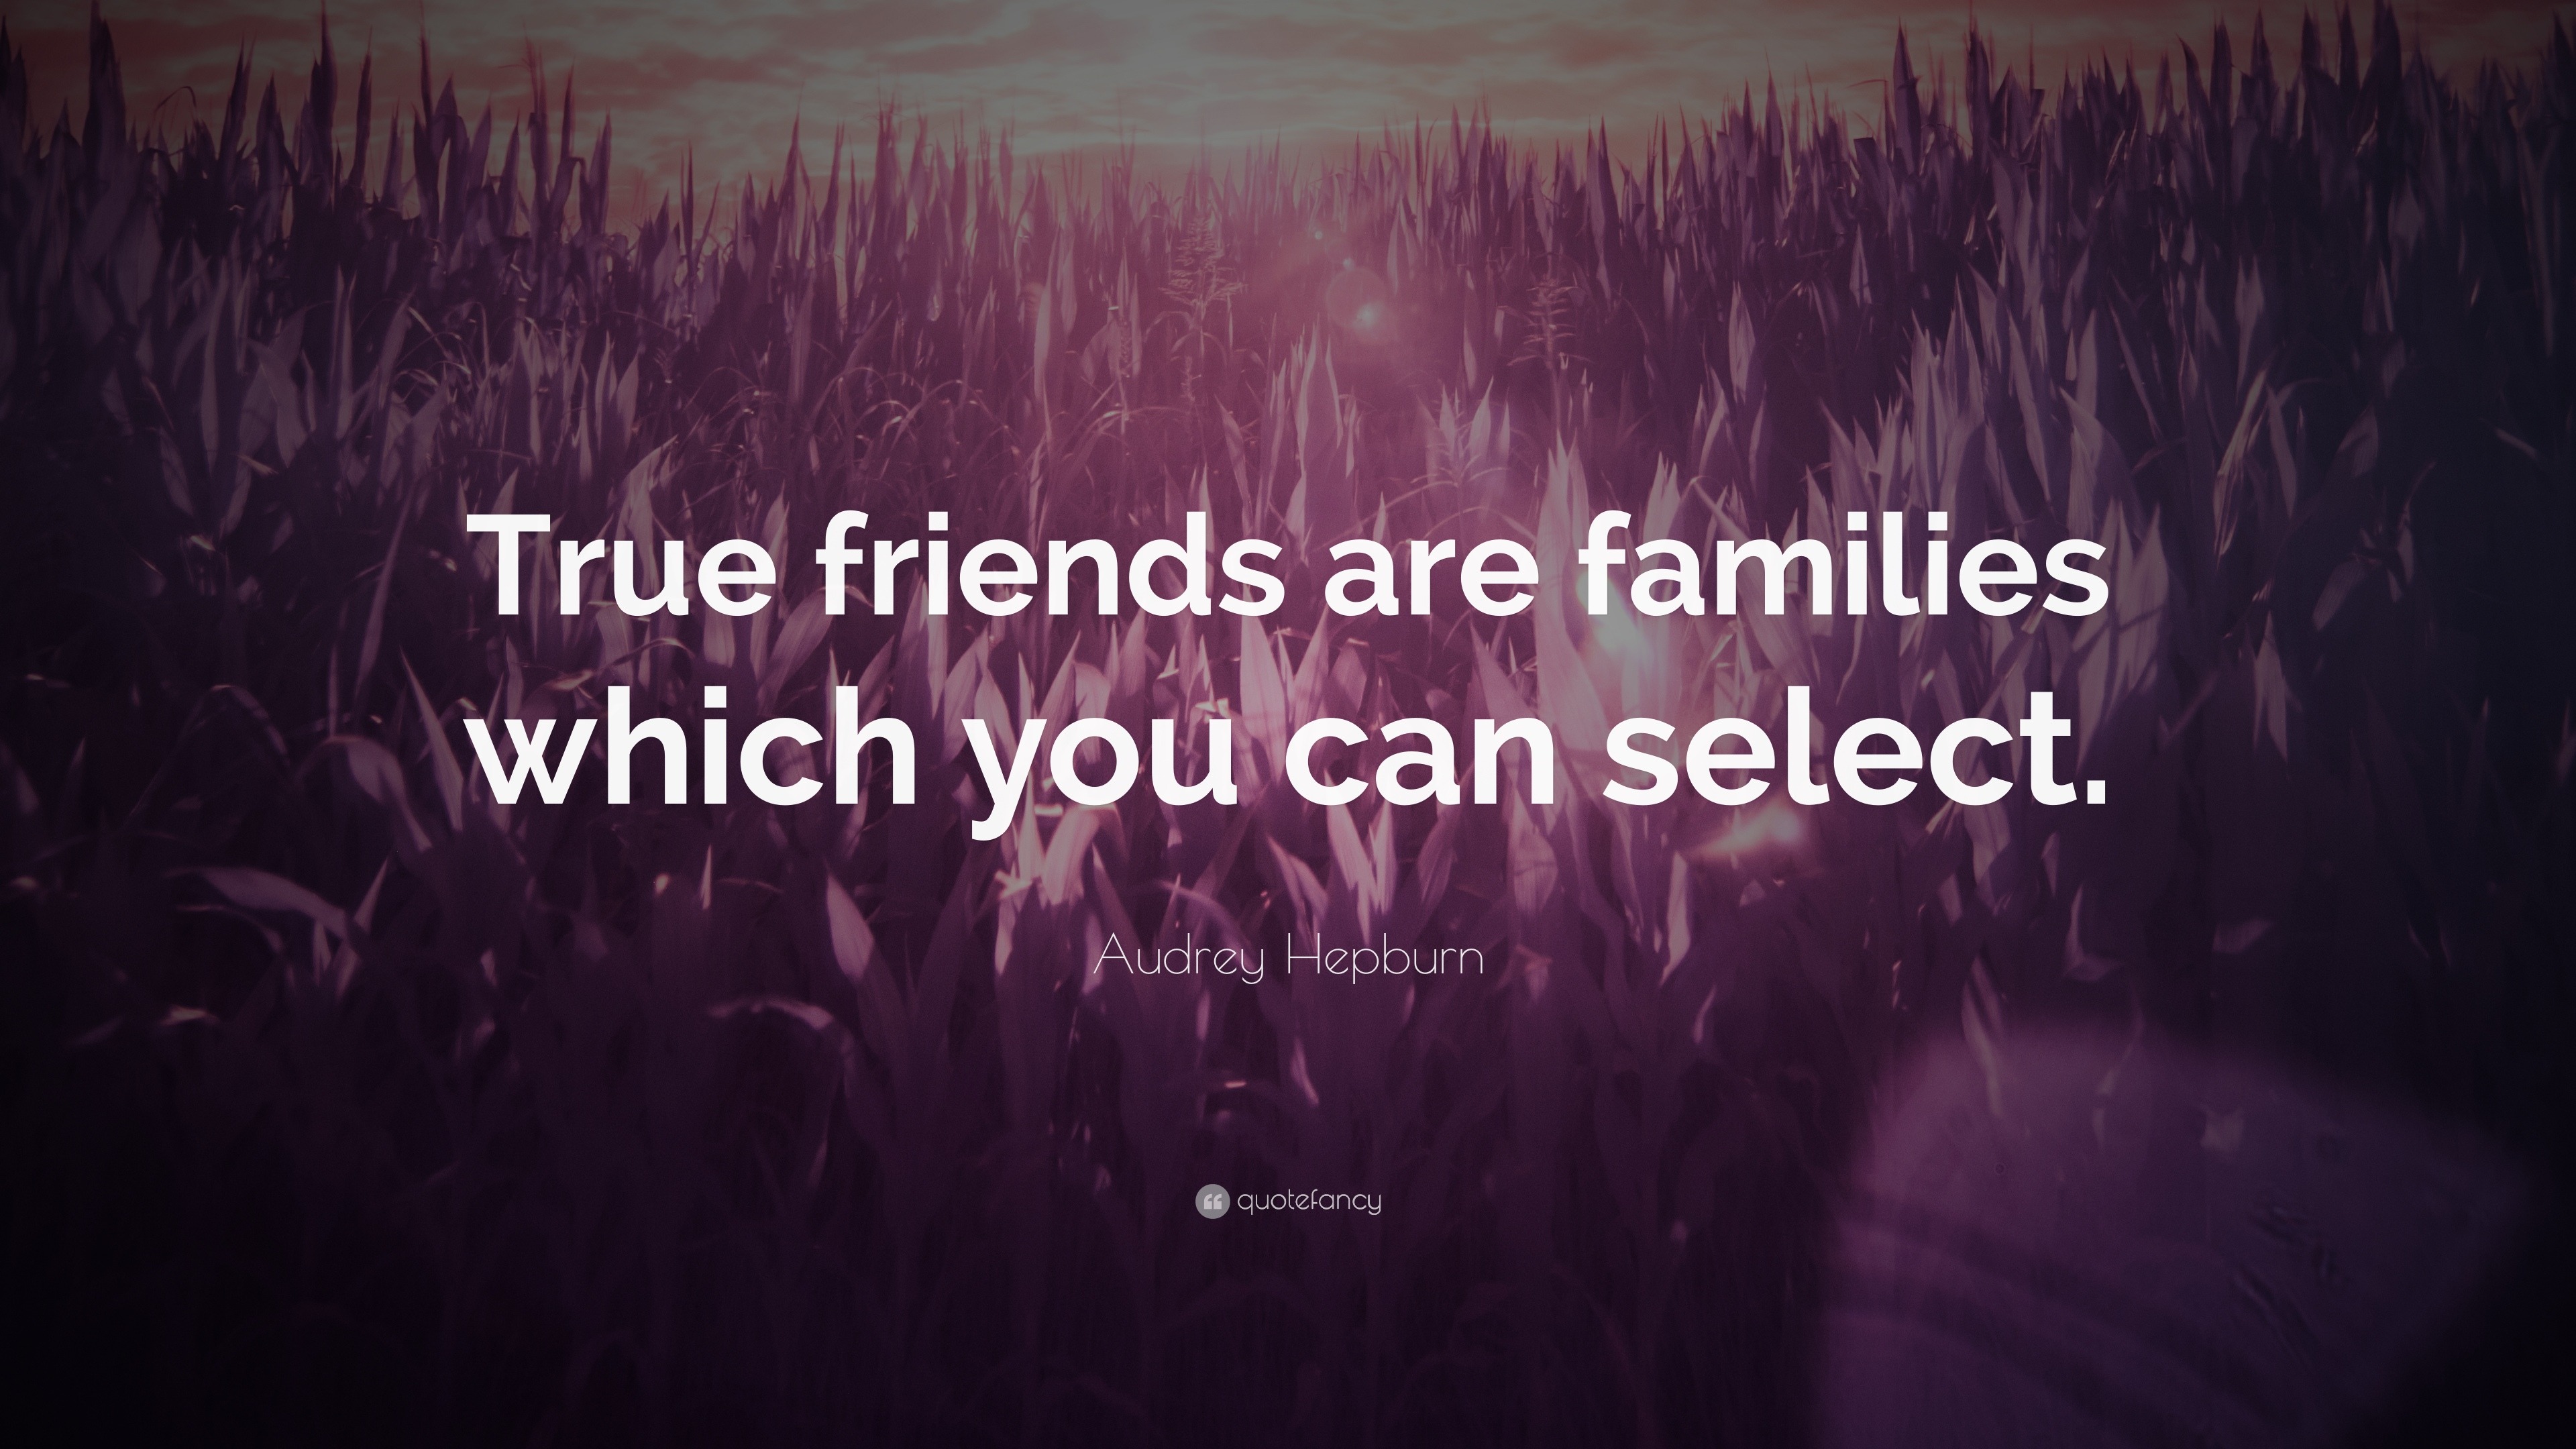 Audrey Hepburn Quote: “True friends are families which you can select.”